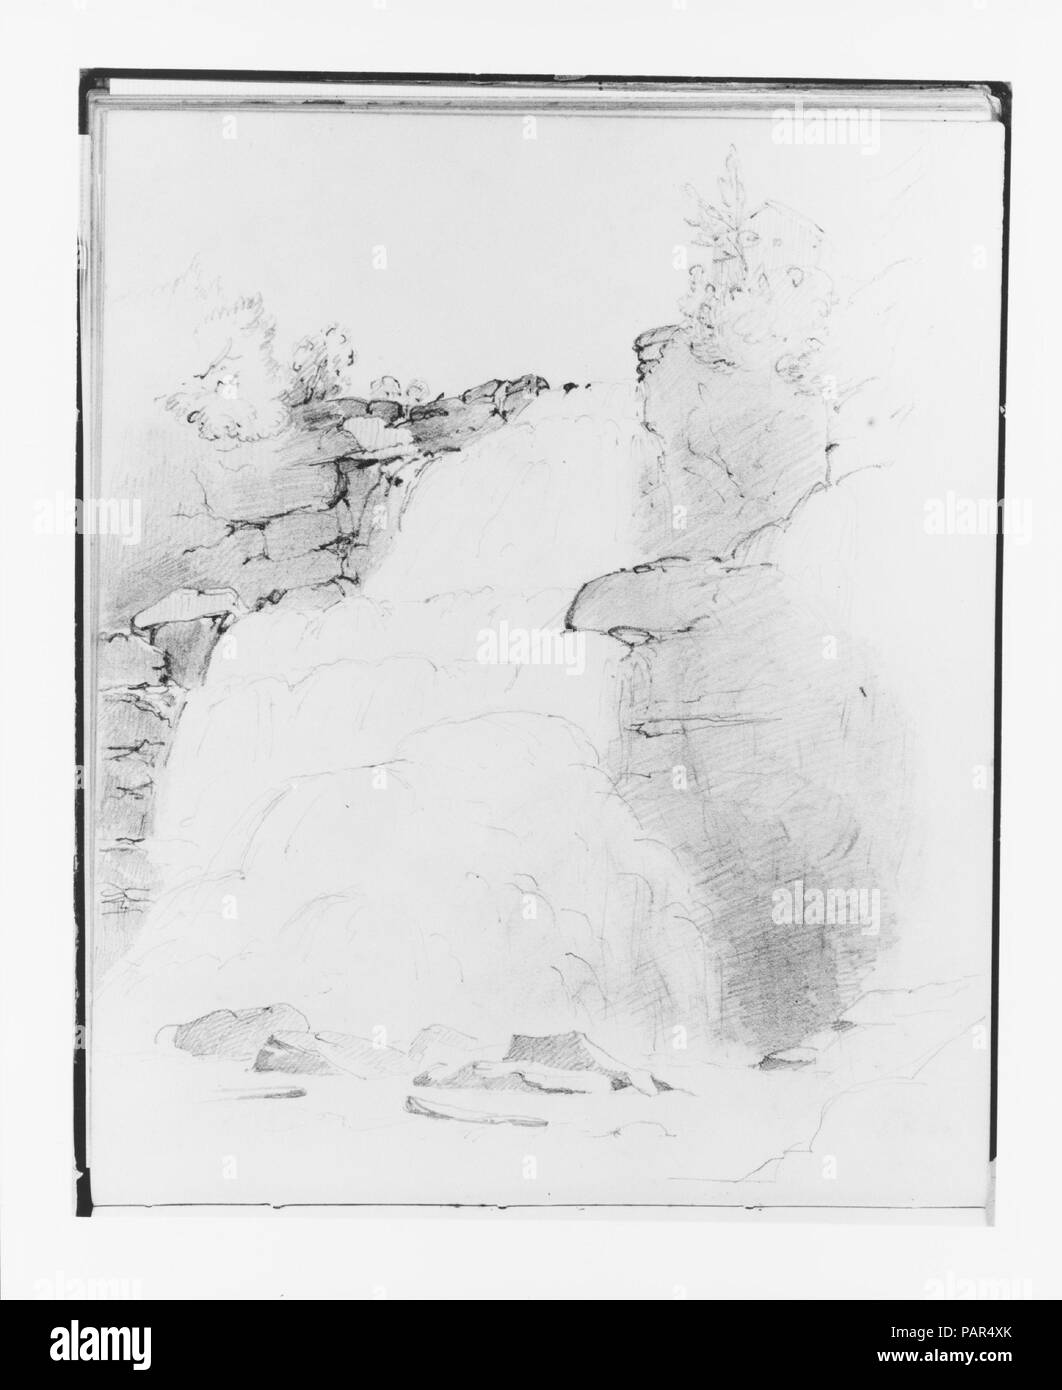 Waterfall (from Sketchbook). Artist: Francis William Edmonds (American, Hudson, New York 1806-1863 Bronxville, New York). Dimensions: 8 x 6 5/8 in. (20.3 x 16.8 cm). Date: ca. 1838 and after.  The execution of sketches and studies was a crucial part of Edmonds's creative process. Many of his drawings exist as independent works--apparently never taken further--but many others represent an initial step in his conception for paintings. This sketchbook, which he began about 1838, includes both types of drawings of a variety of subjects. Museum: Metropolitan Museum of Art, New York, USA. Stock Photo